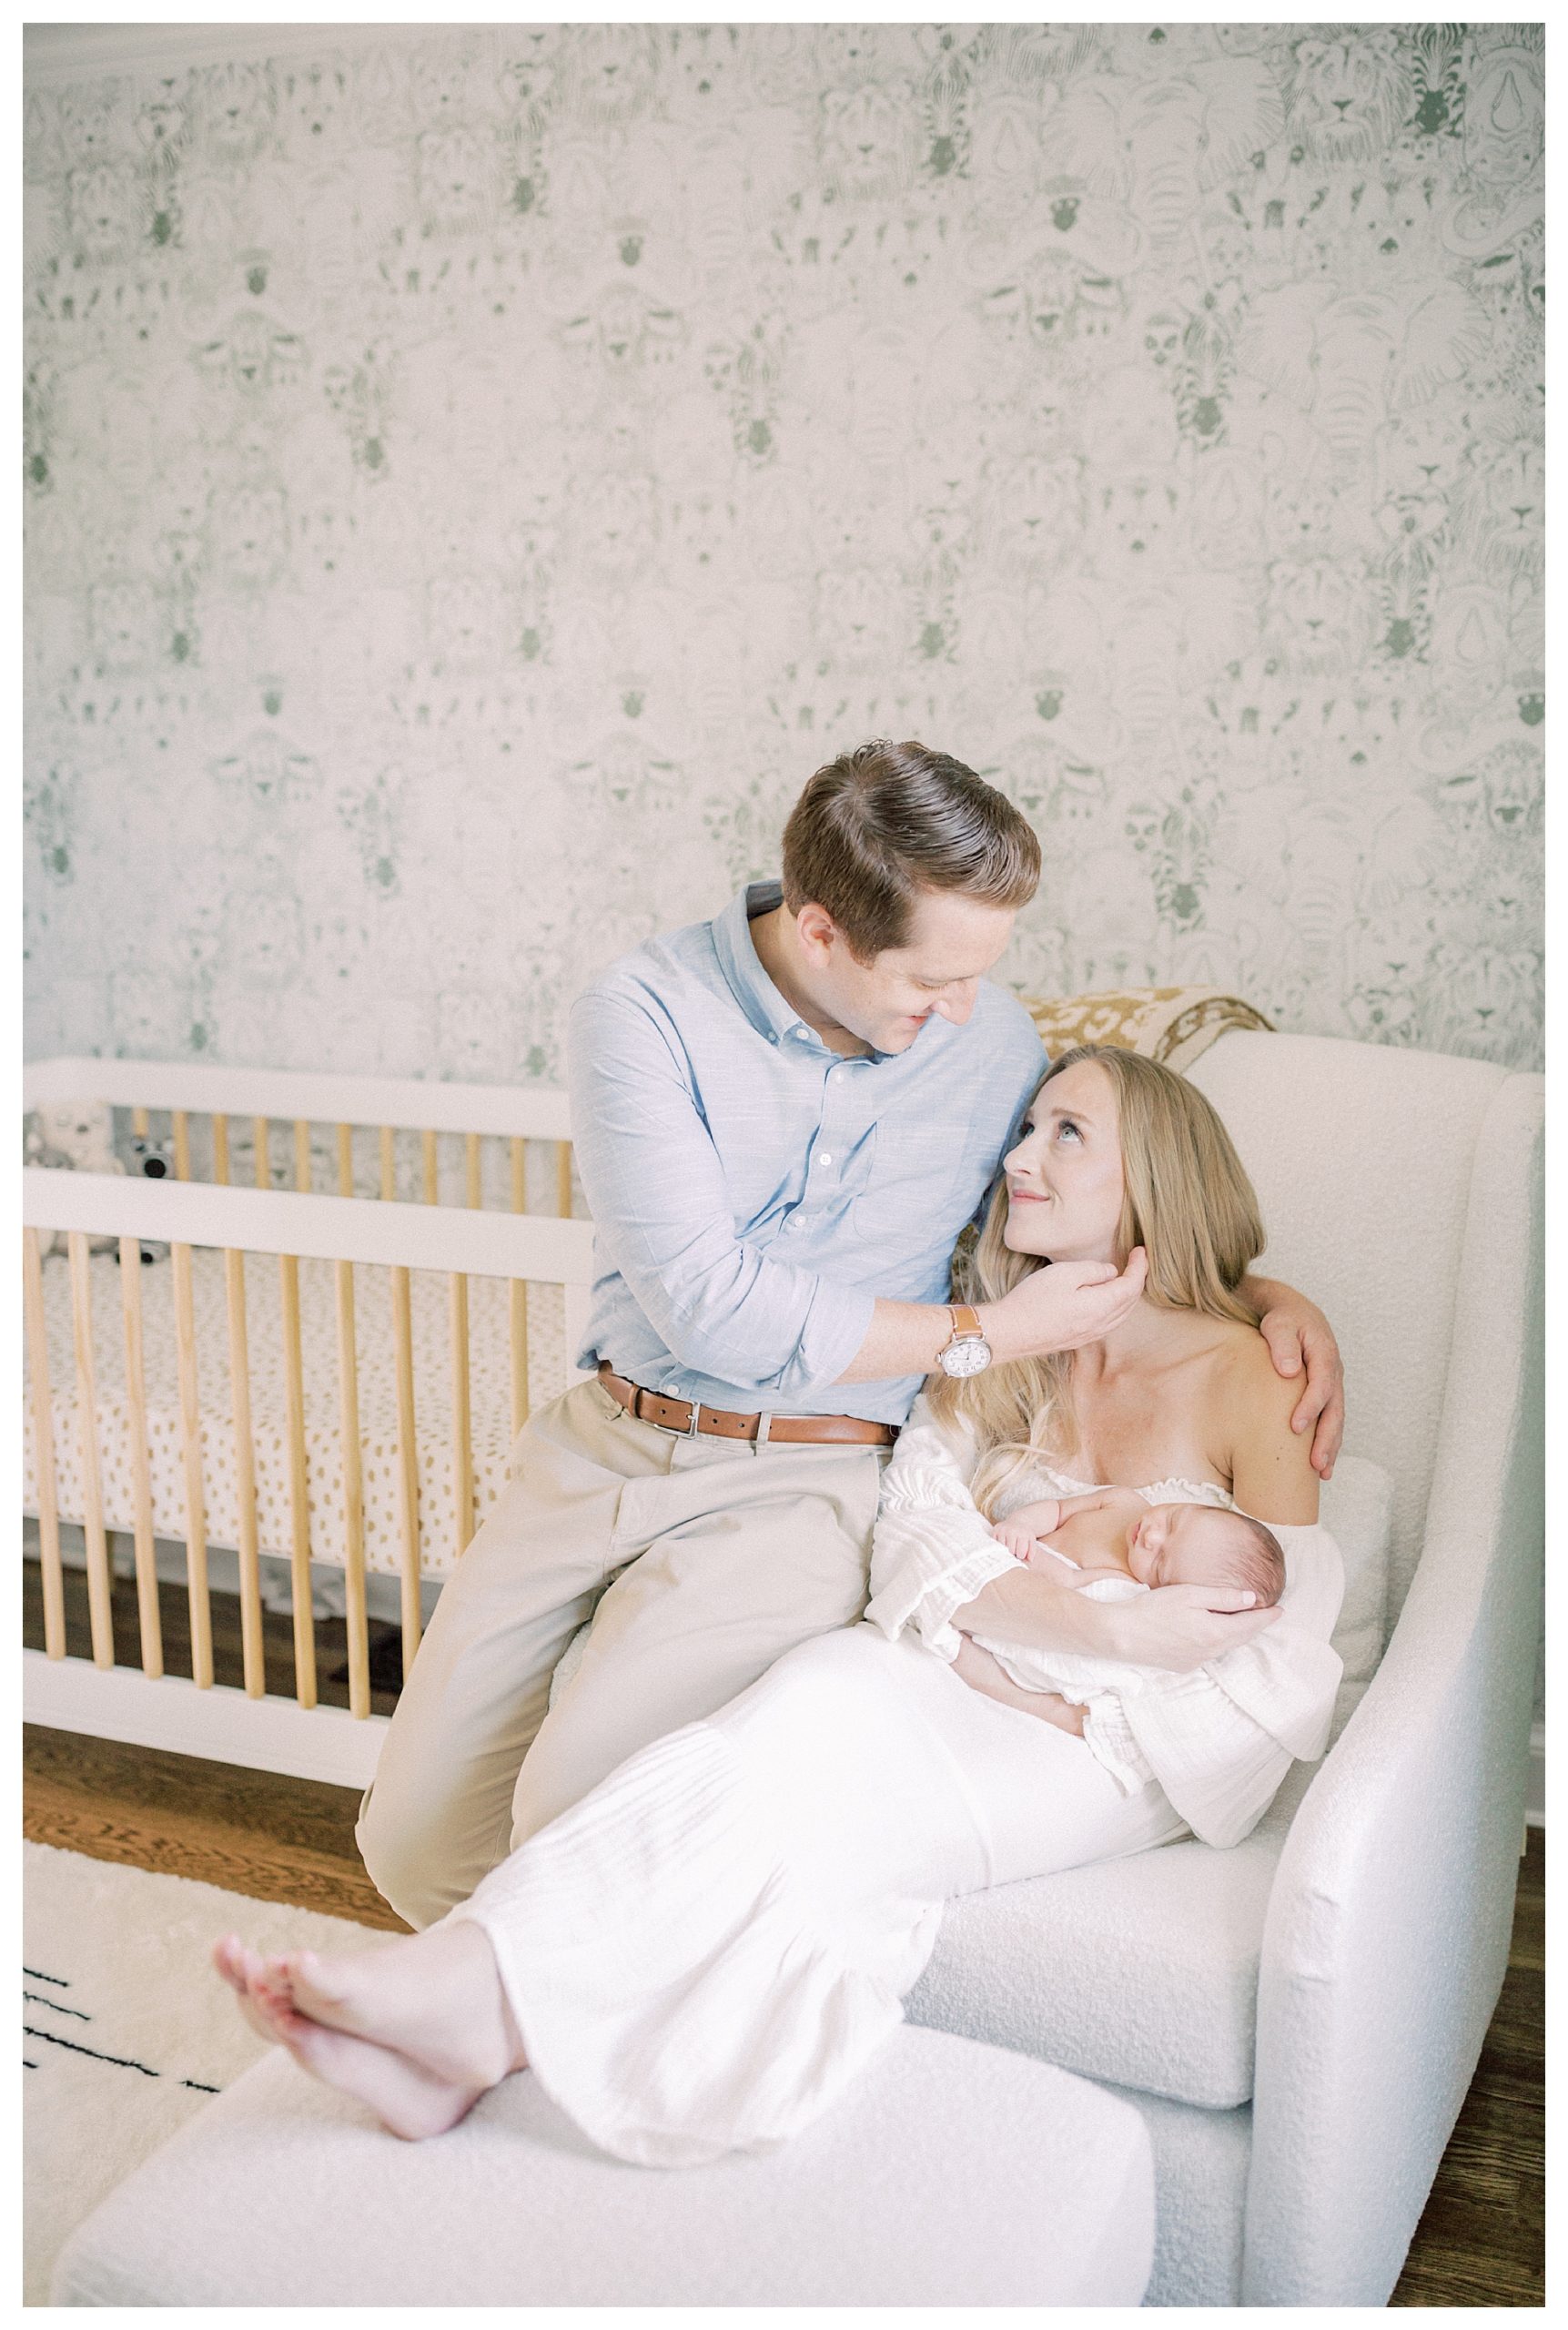 New father sits on edge of chair in nursery, caressing his wife's cheek who holds their newborn.